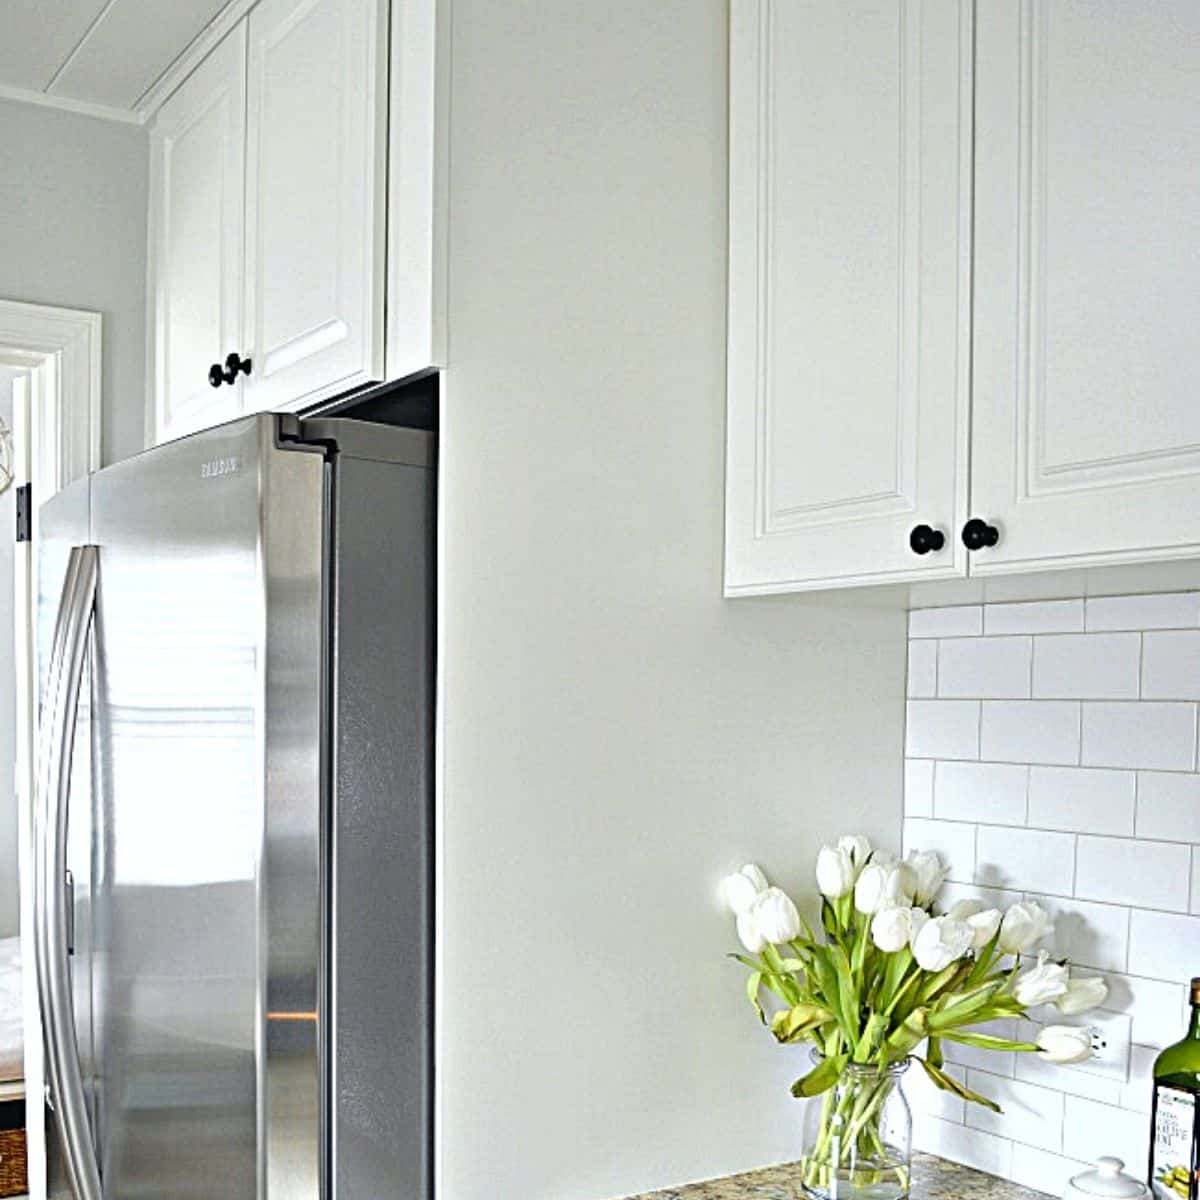 How To Build A Diy Refrigerator Cabinet, Cabinets Surrounding Fridge